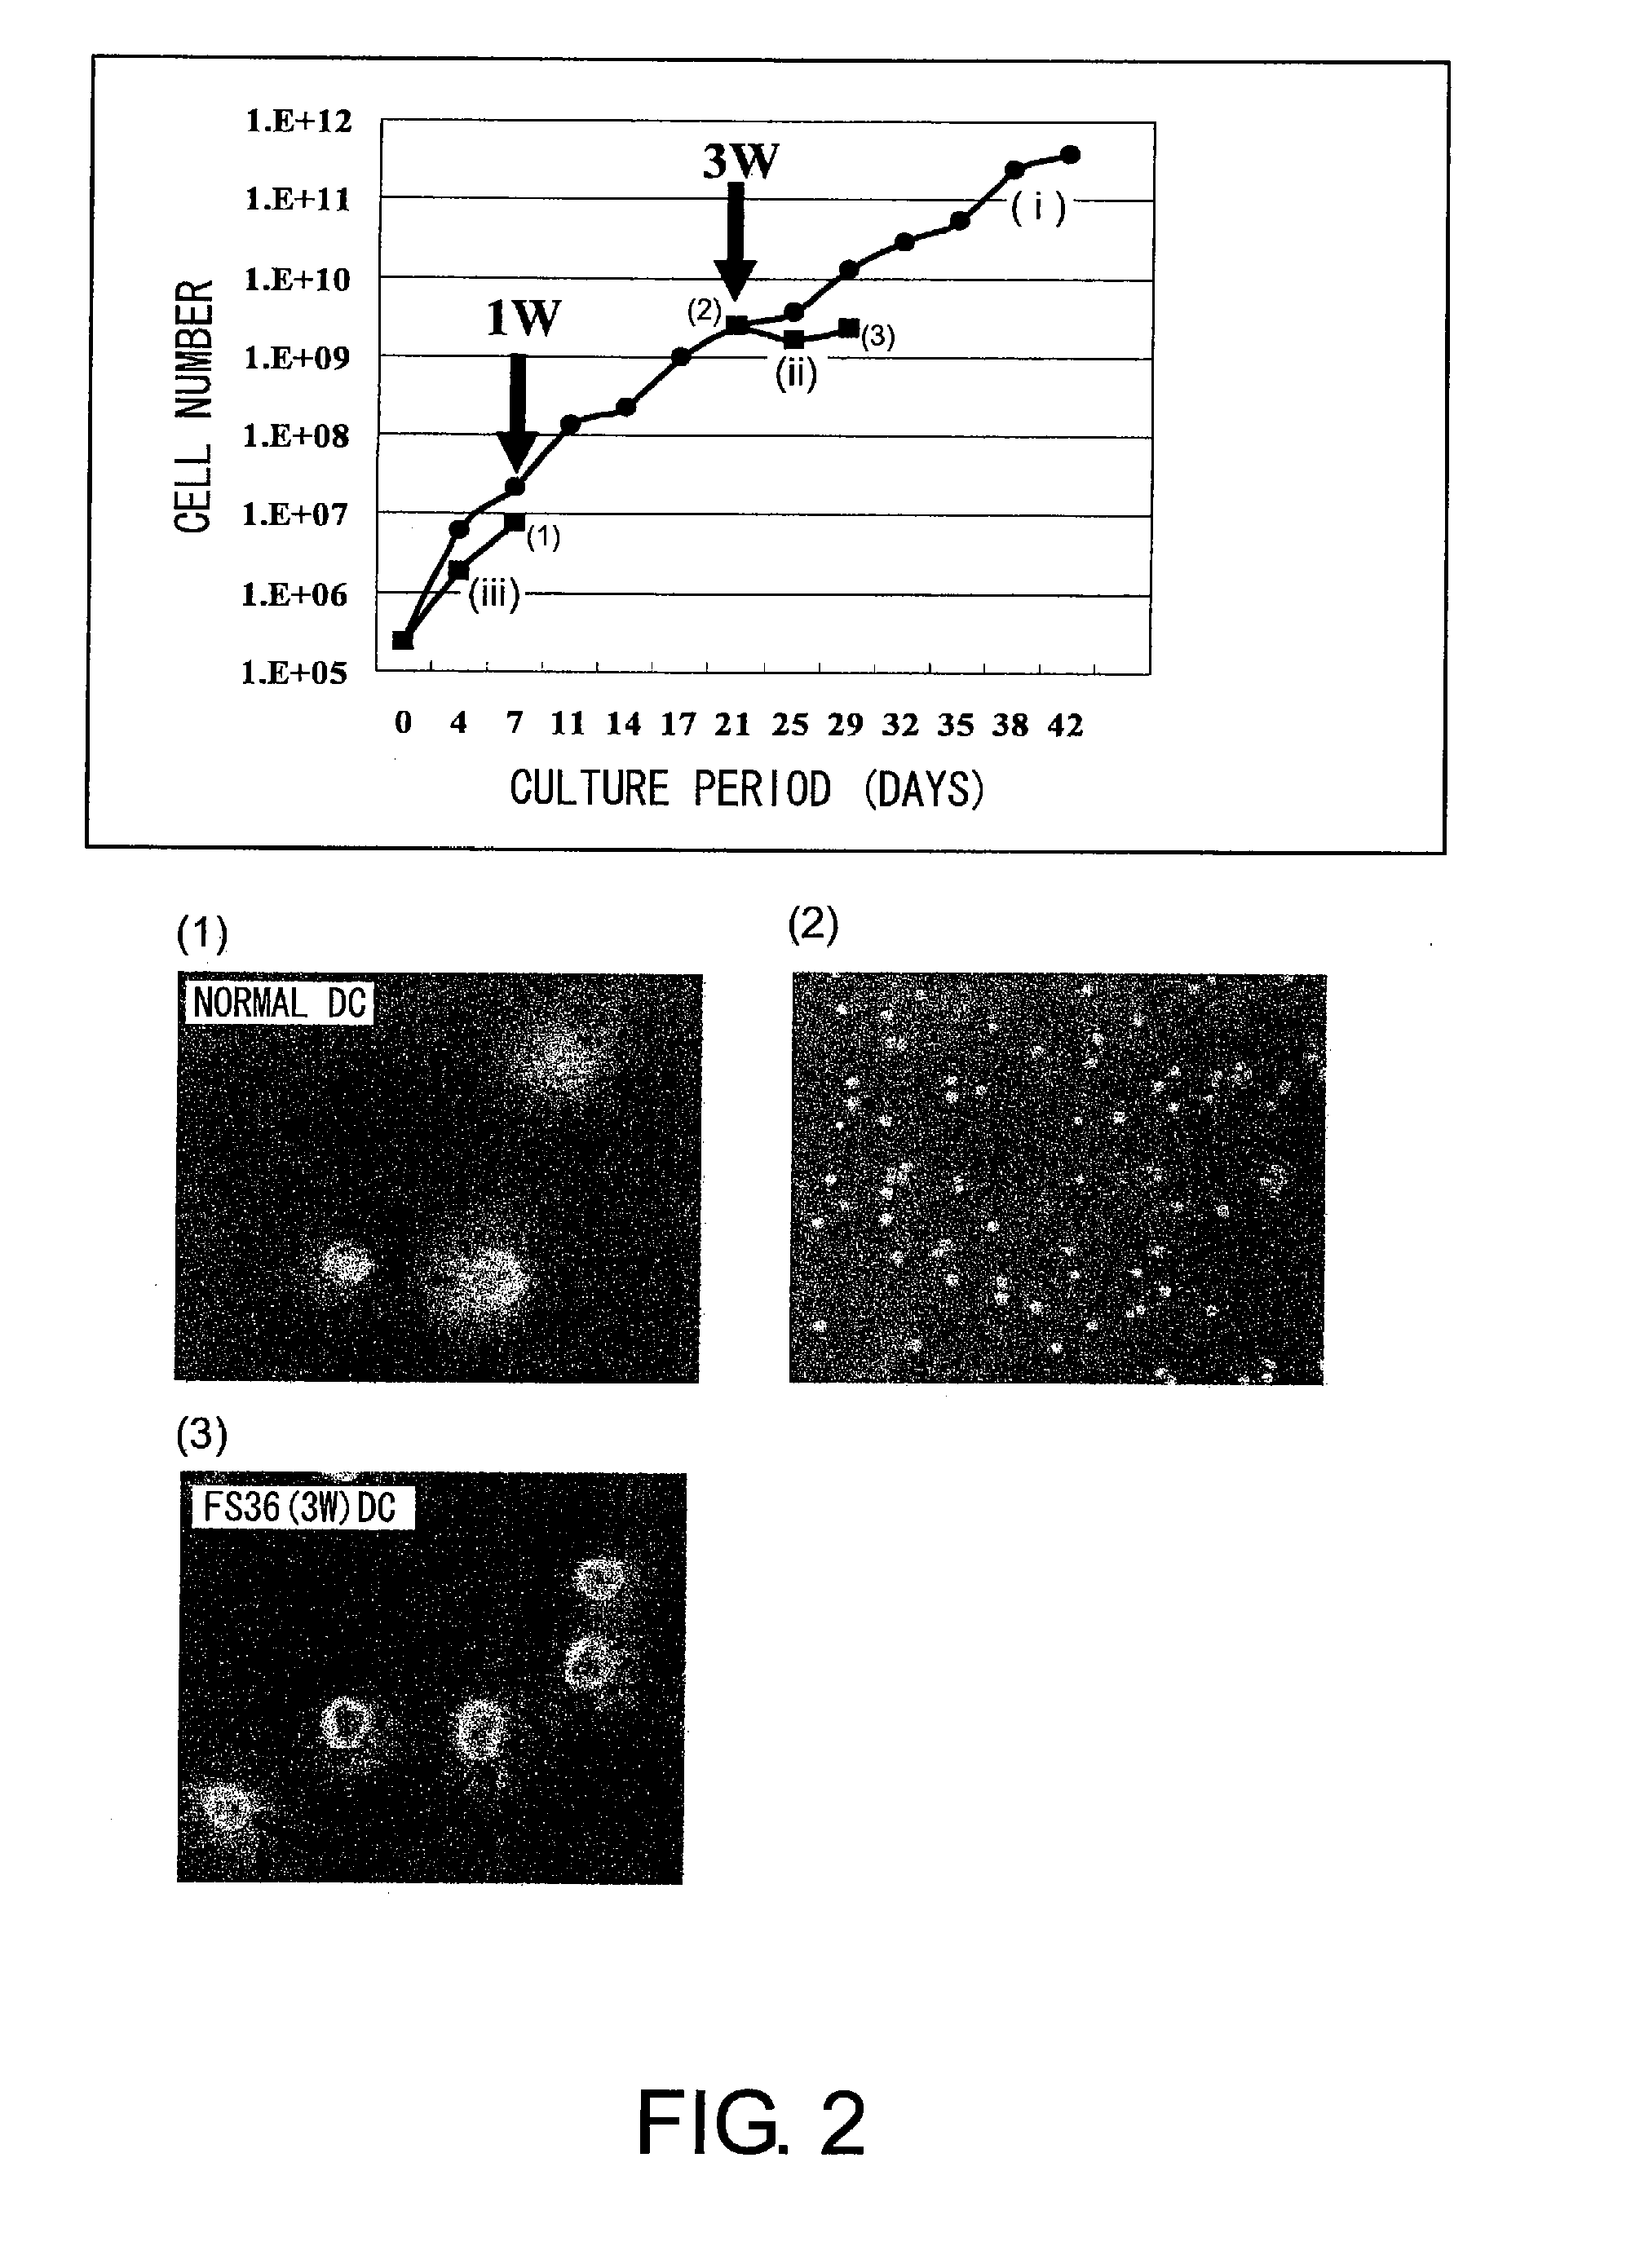 Method for production of dendritic cell